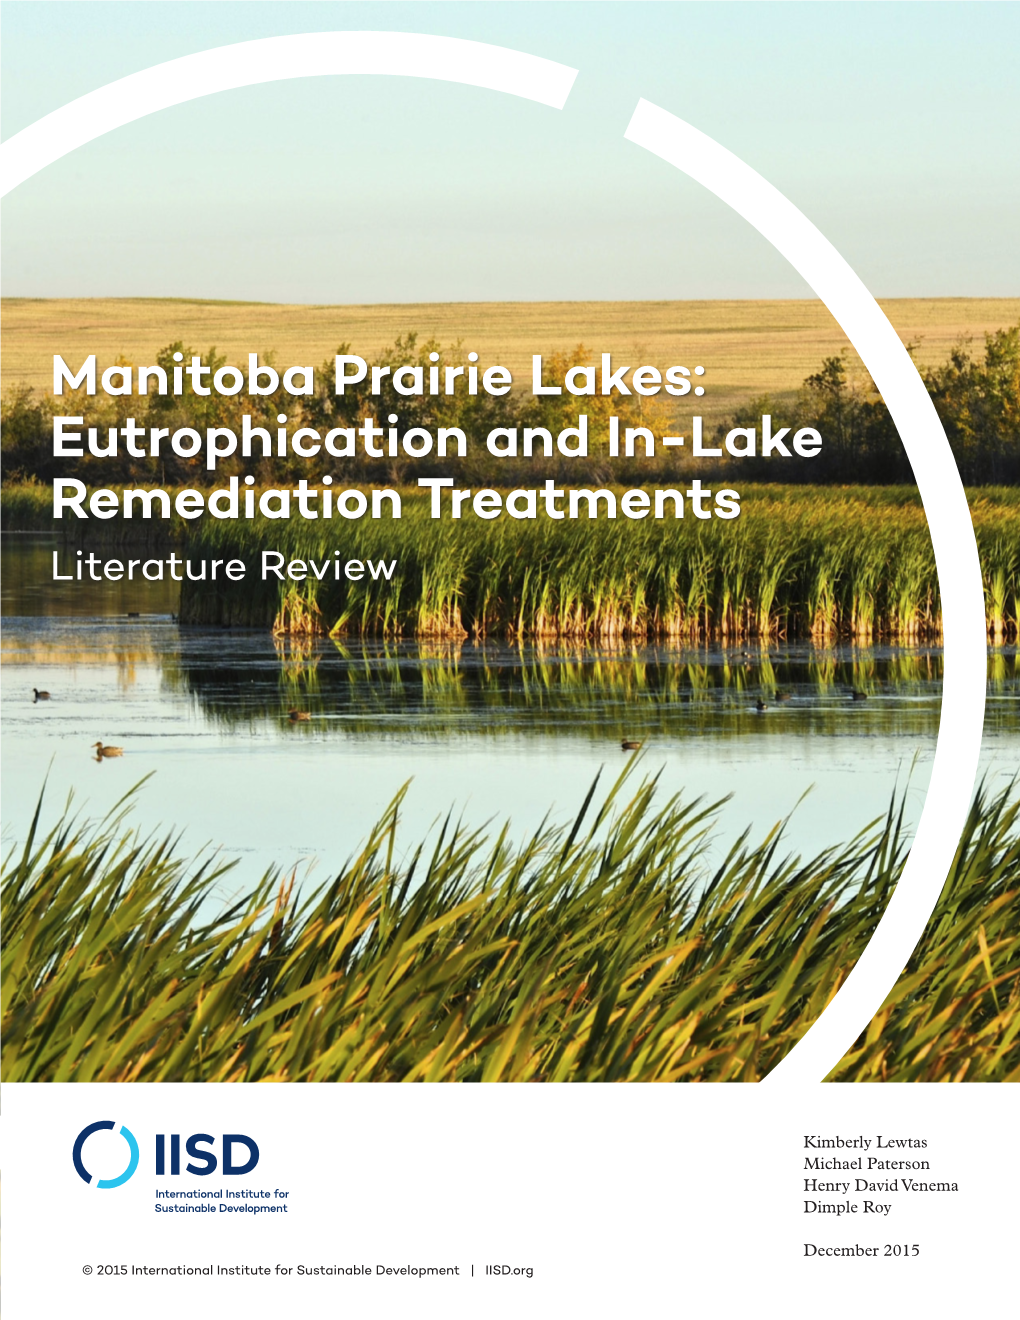 Eutrophication and In-Lake Remediation Treatments Literature Review